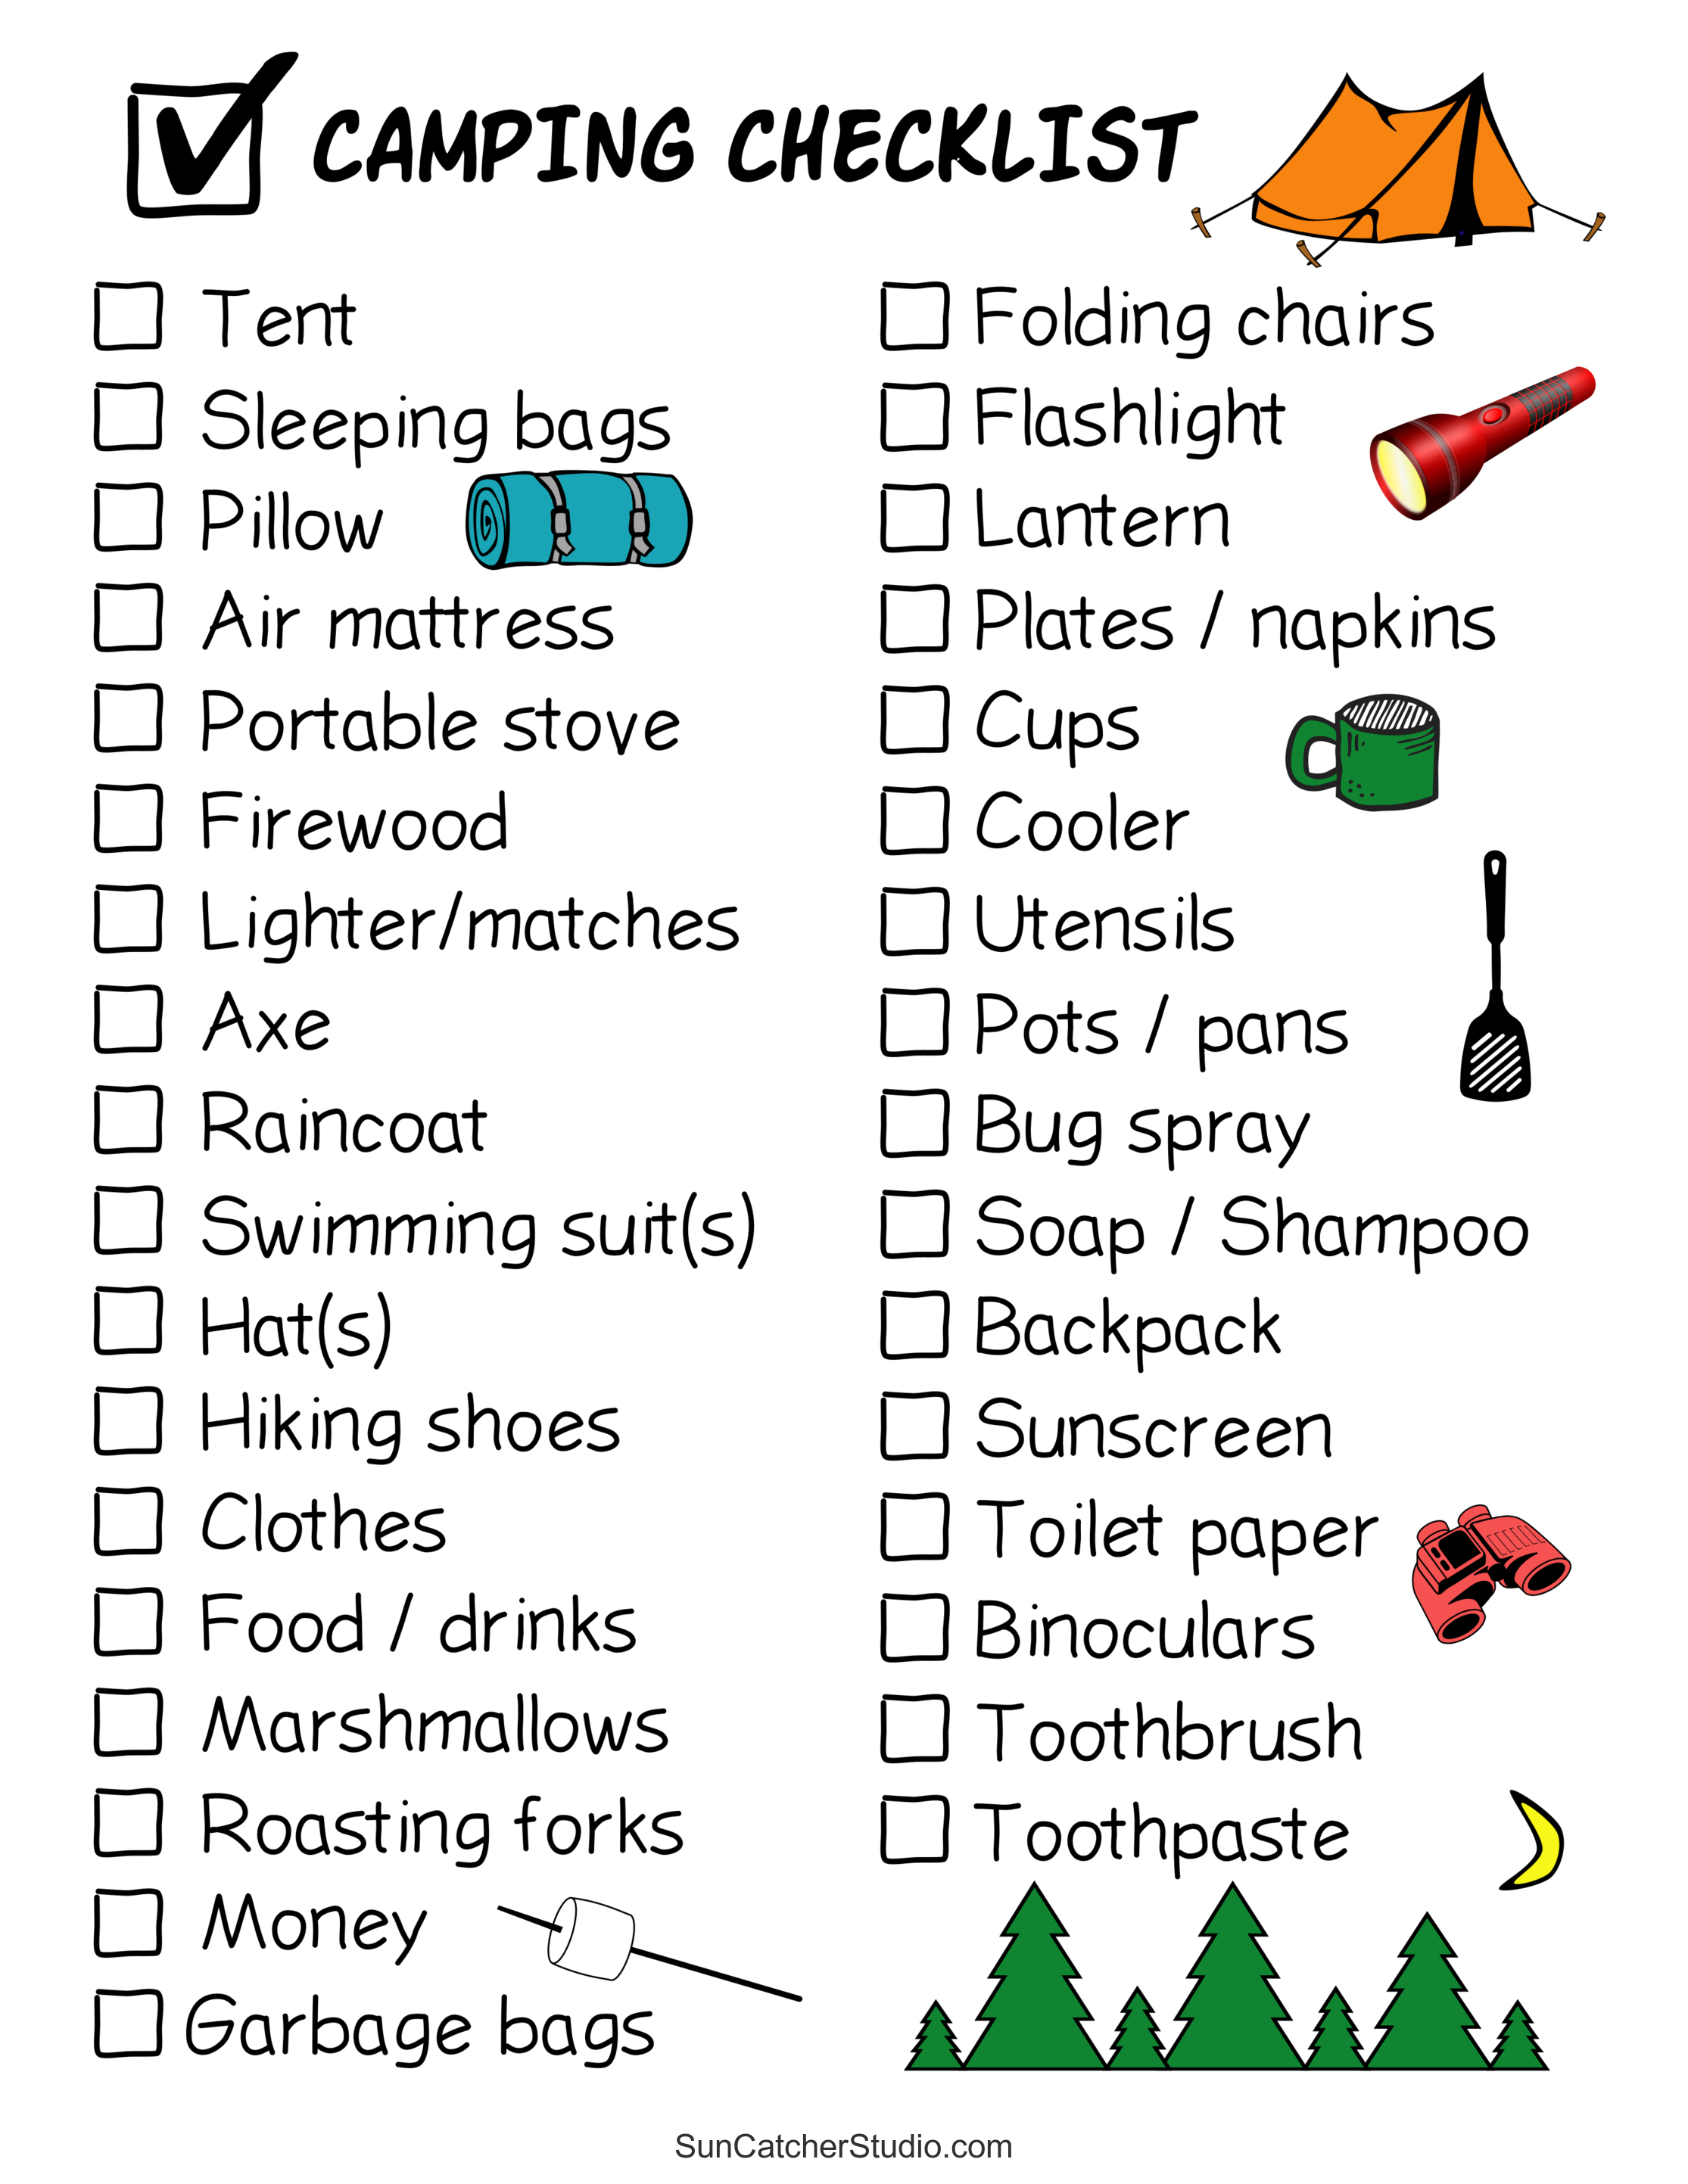 Camping Checklist Essentials: Must-Have Items - Aimless Travels